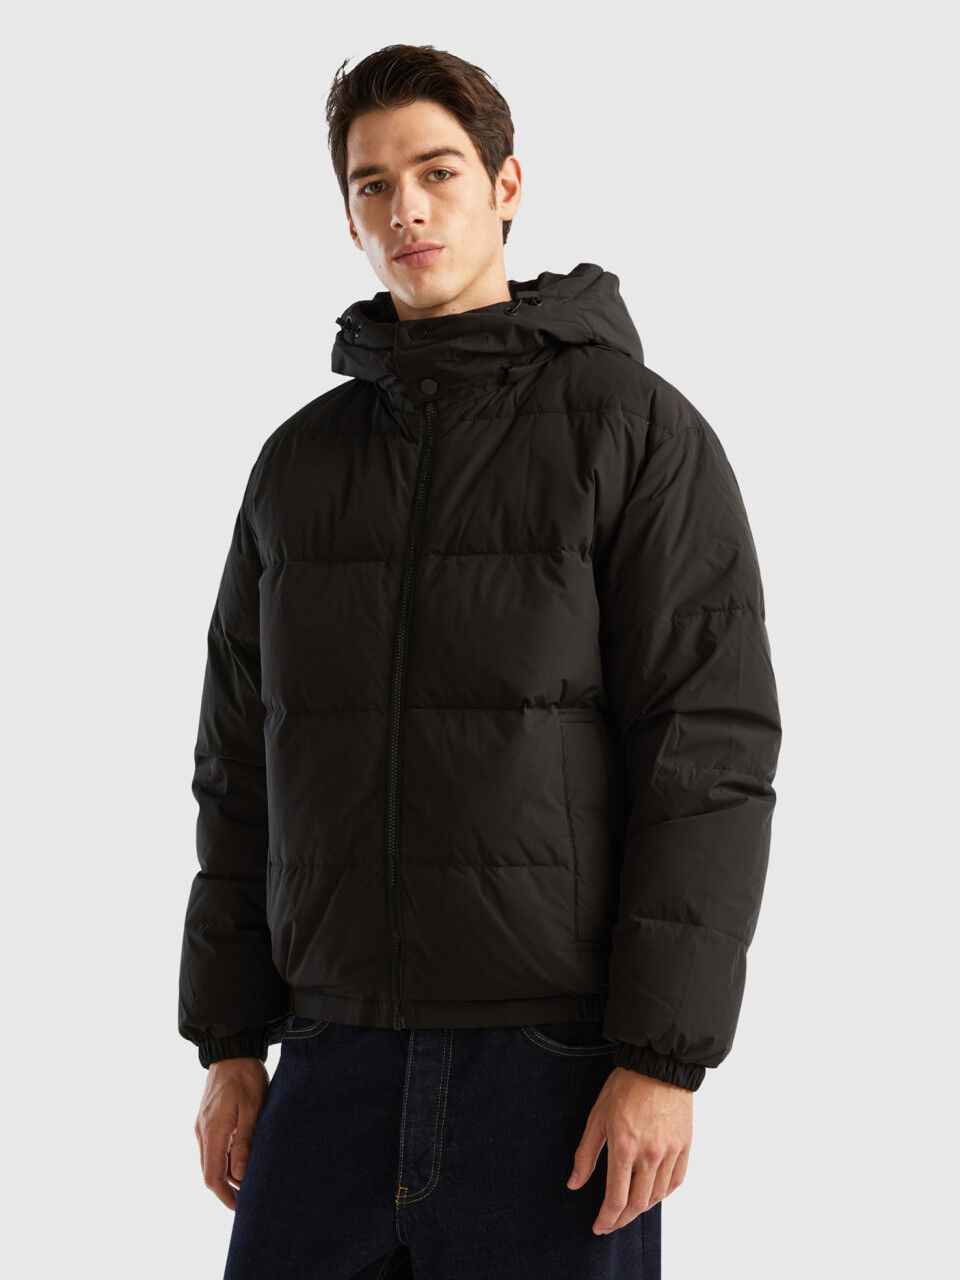 United Colors Of Benetton hooded puffer jacket in khaki | ASOS